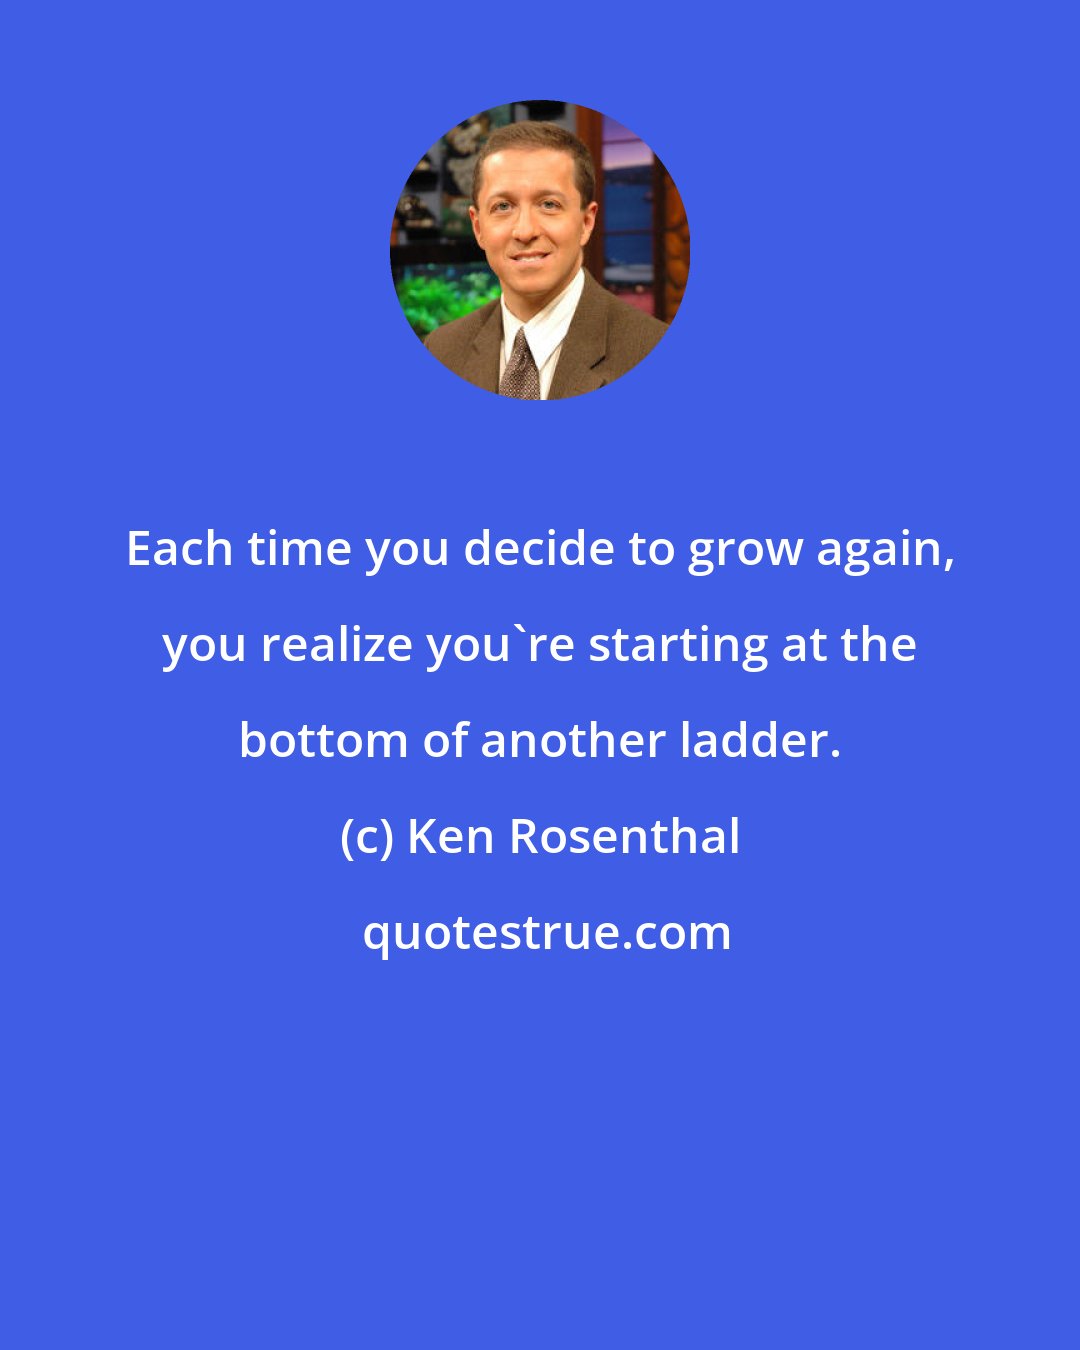 Ken Rosenthal: Each time you decide to grow again, you realize you're starting at the bottom of another ladder.